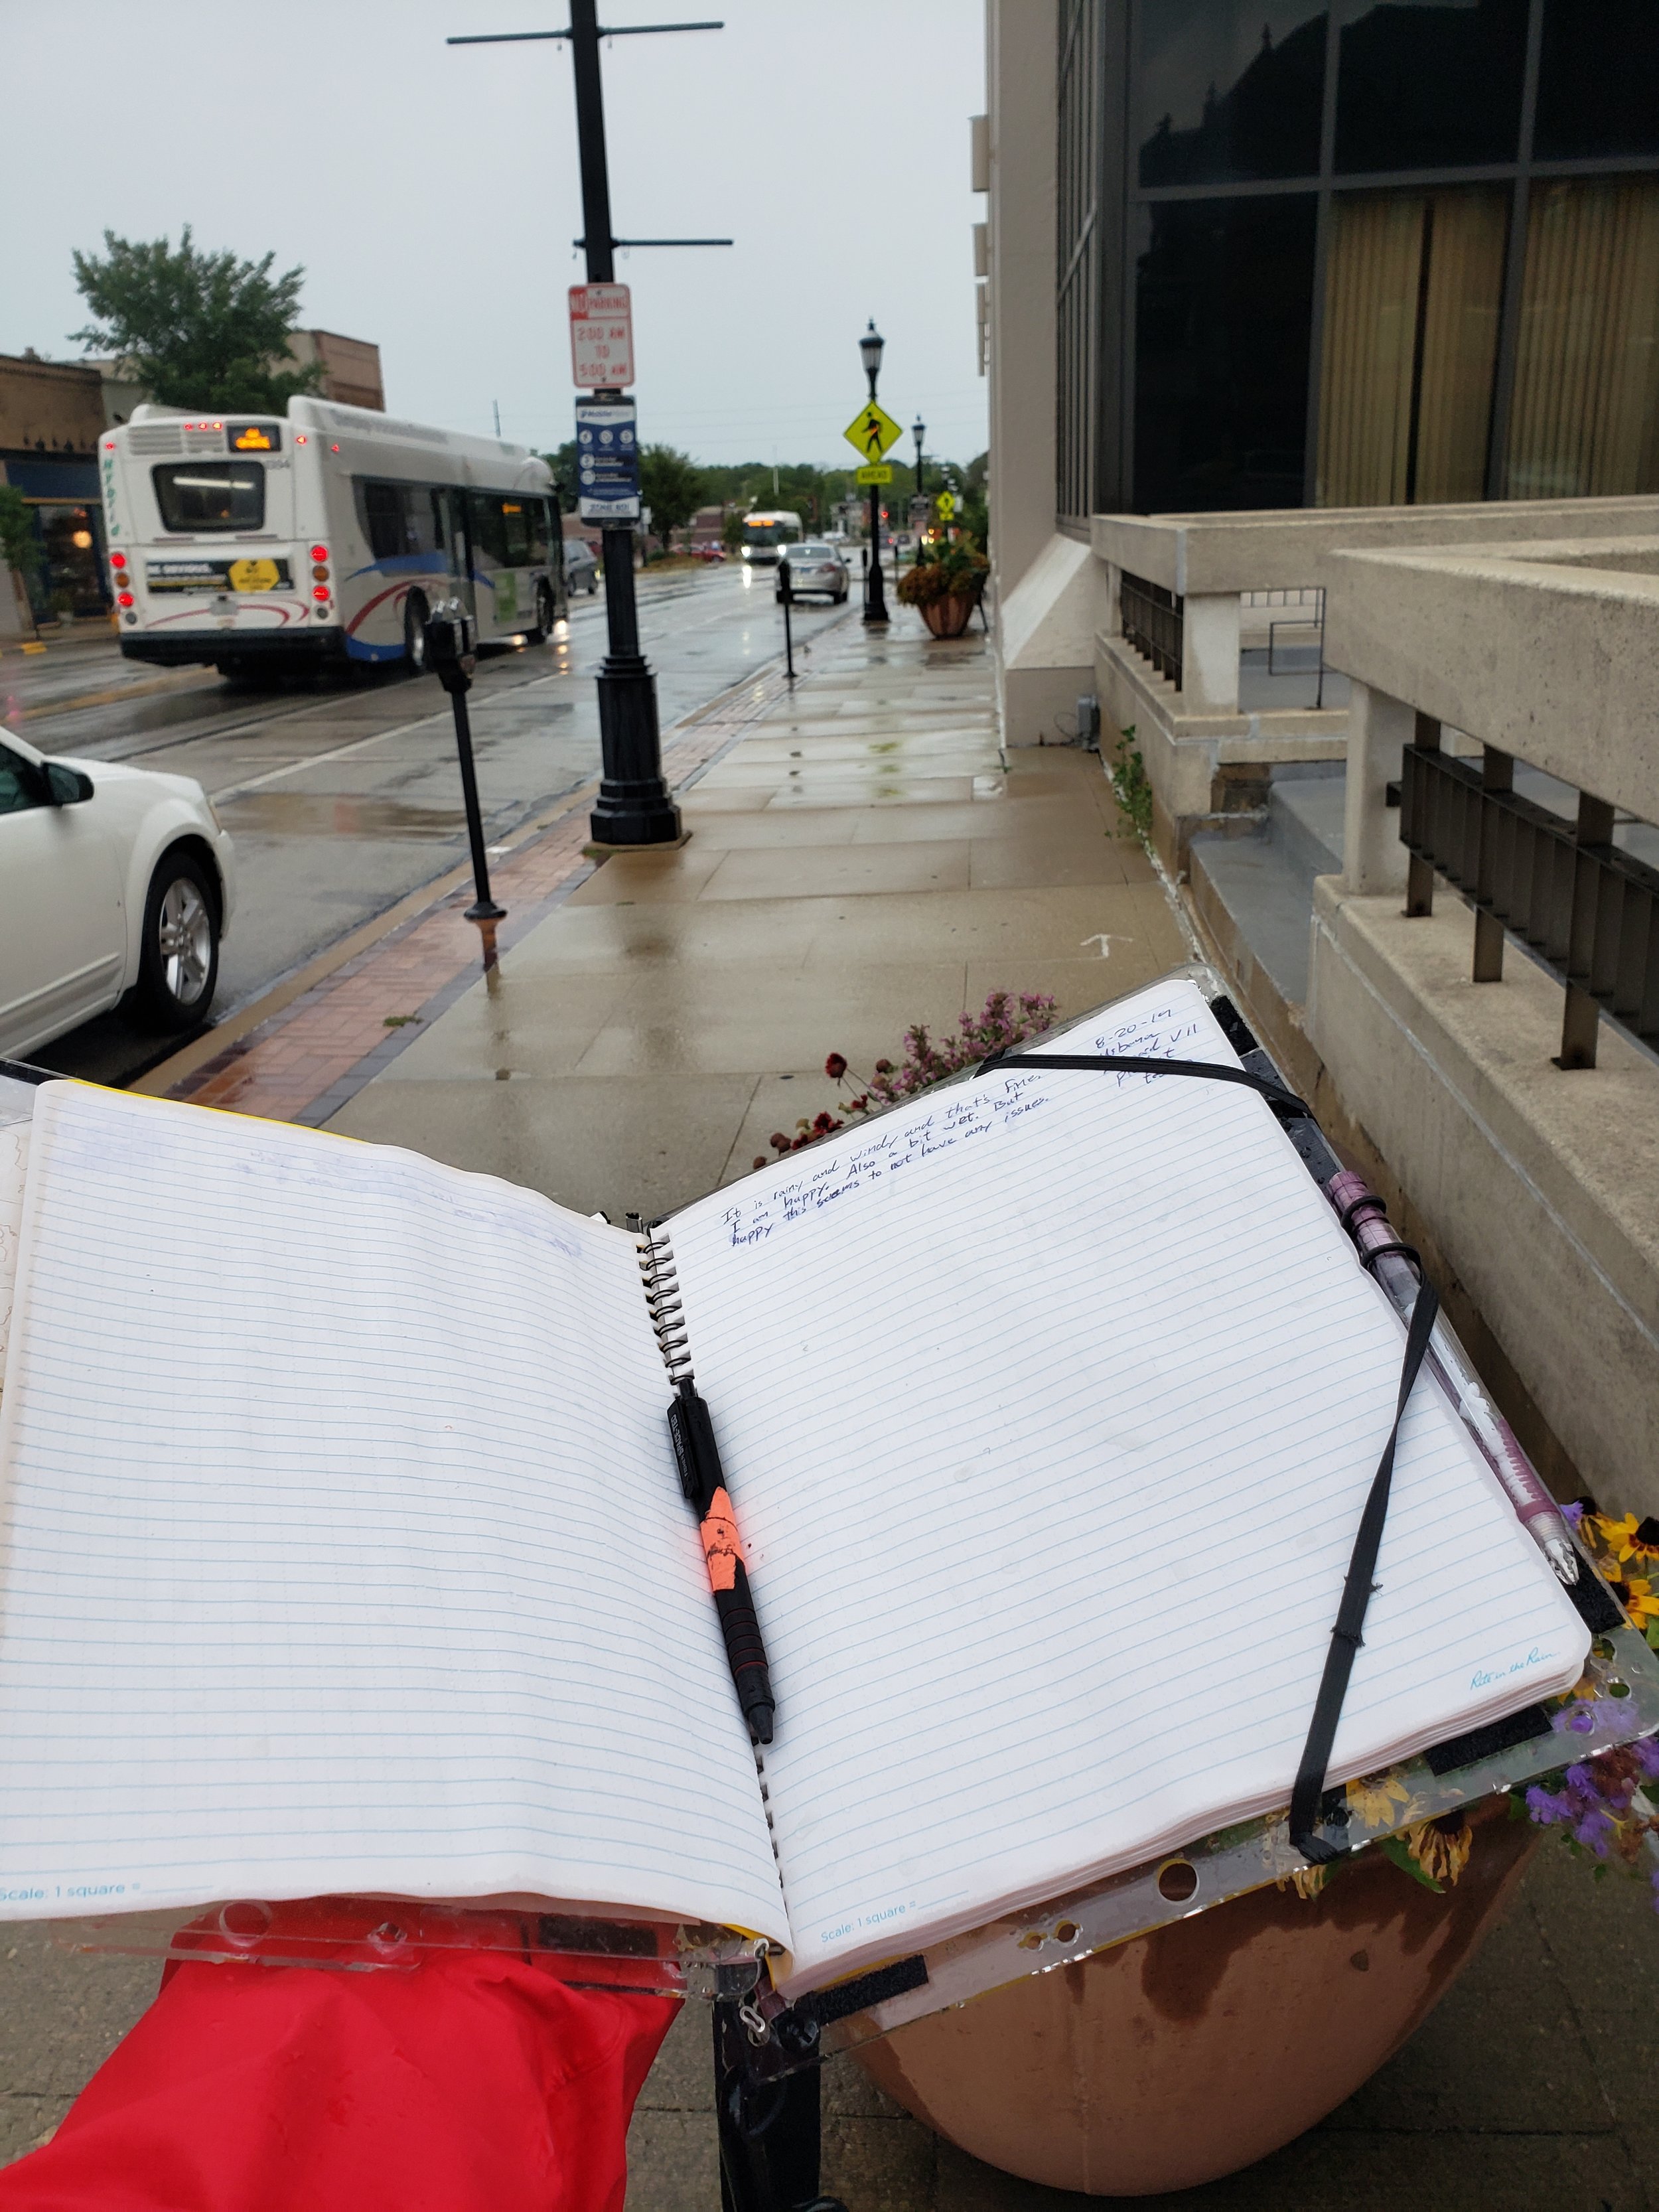 The notebook is also usable in the wind.